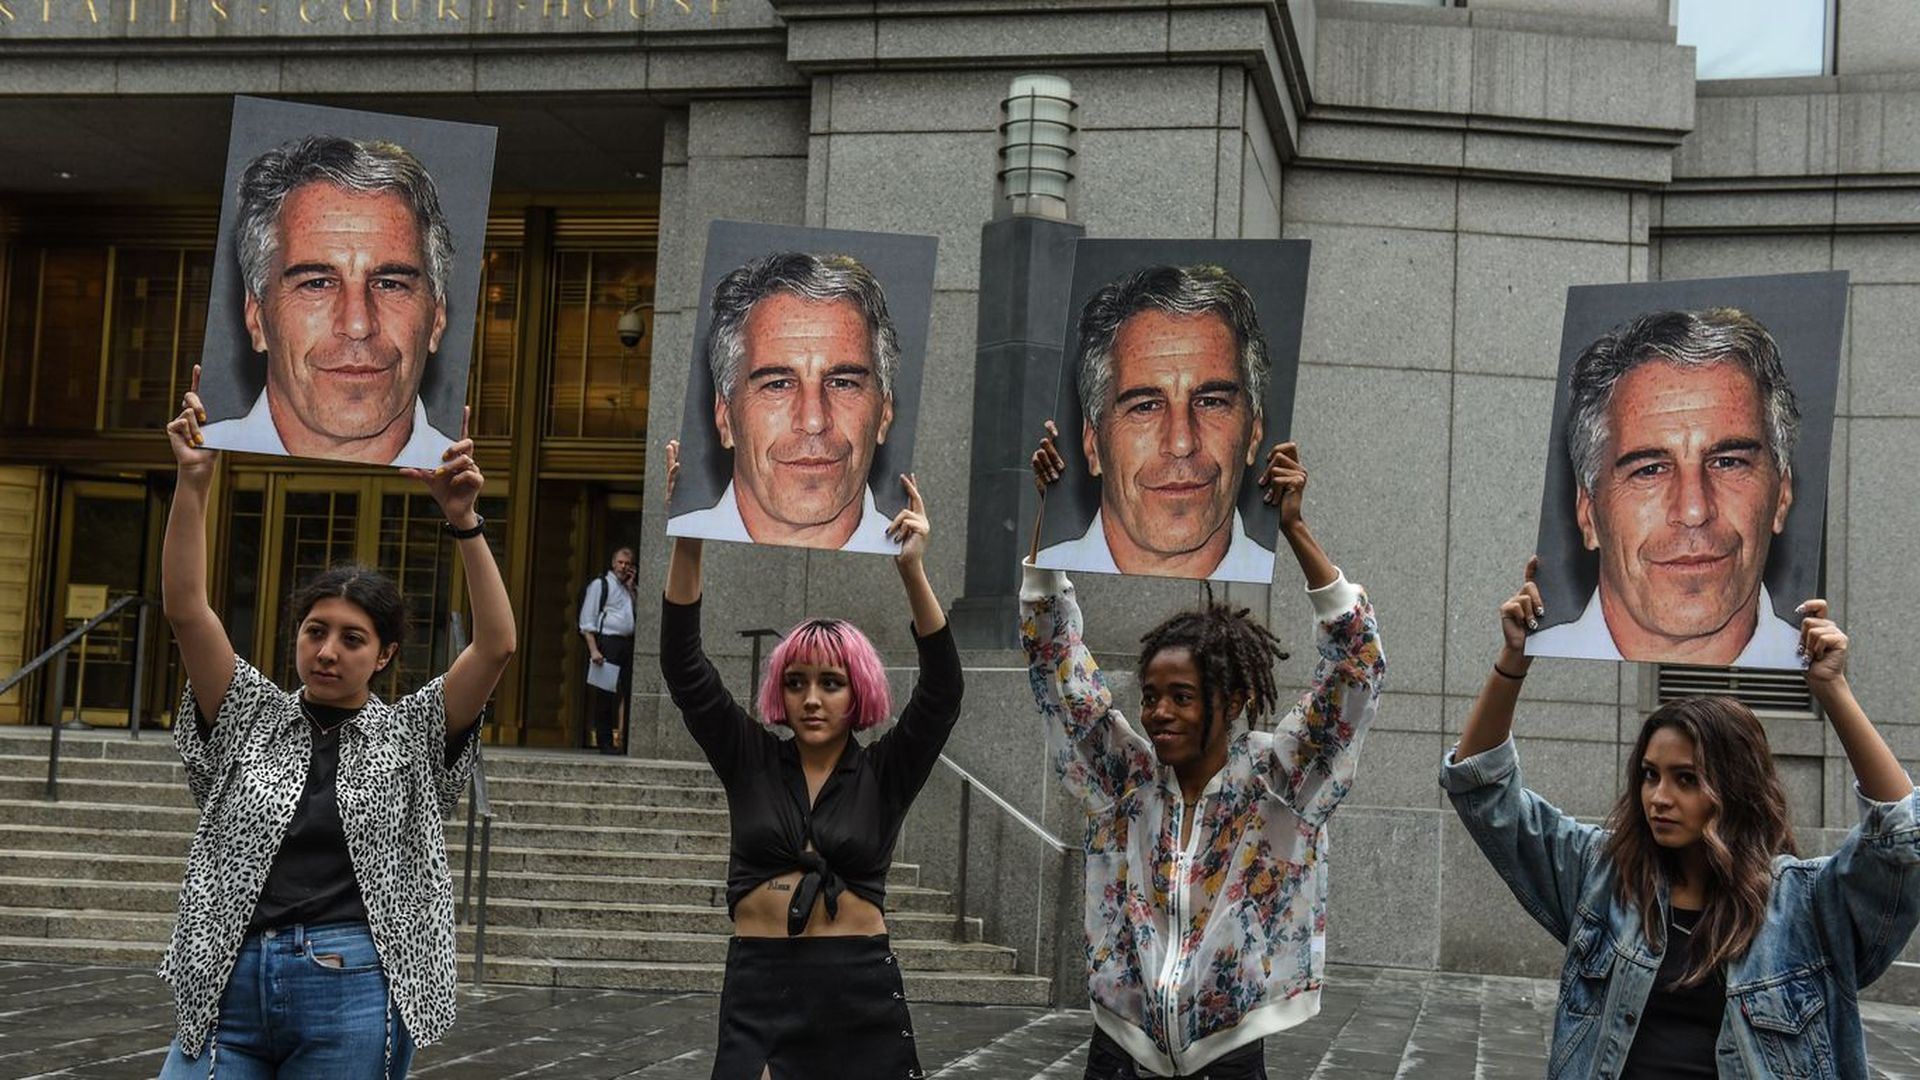 Protesters hold placards of convicted sex offender Jeffrey Epstein.